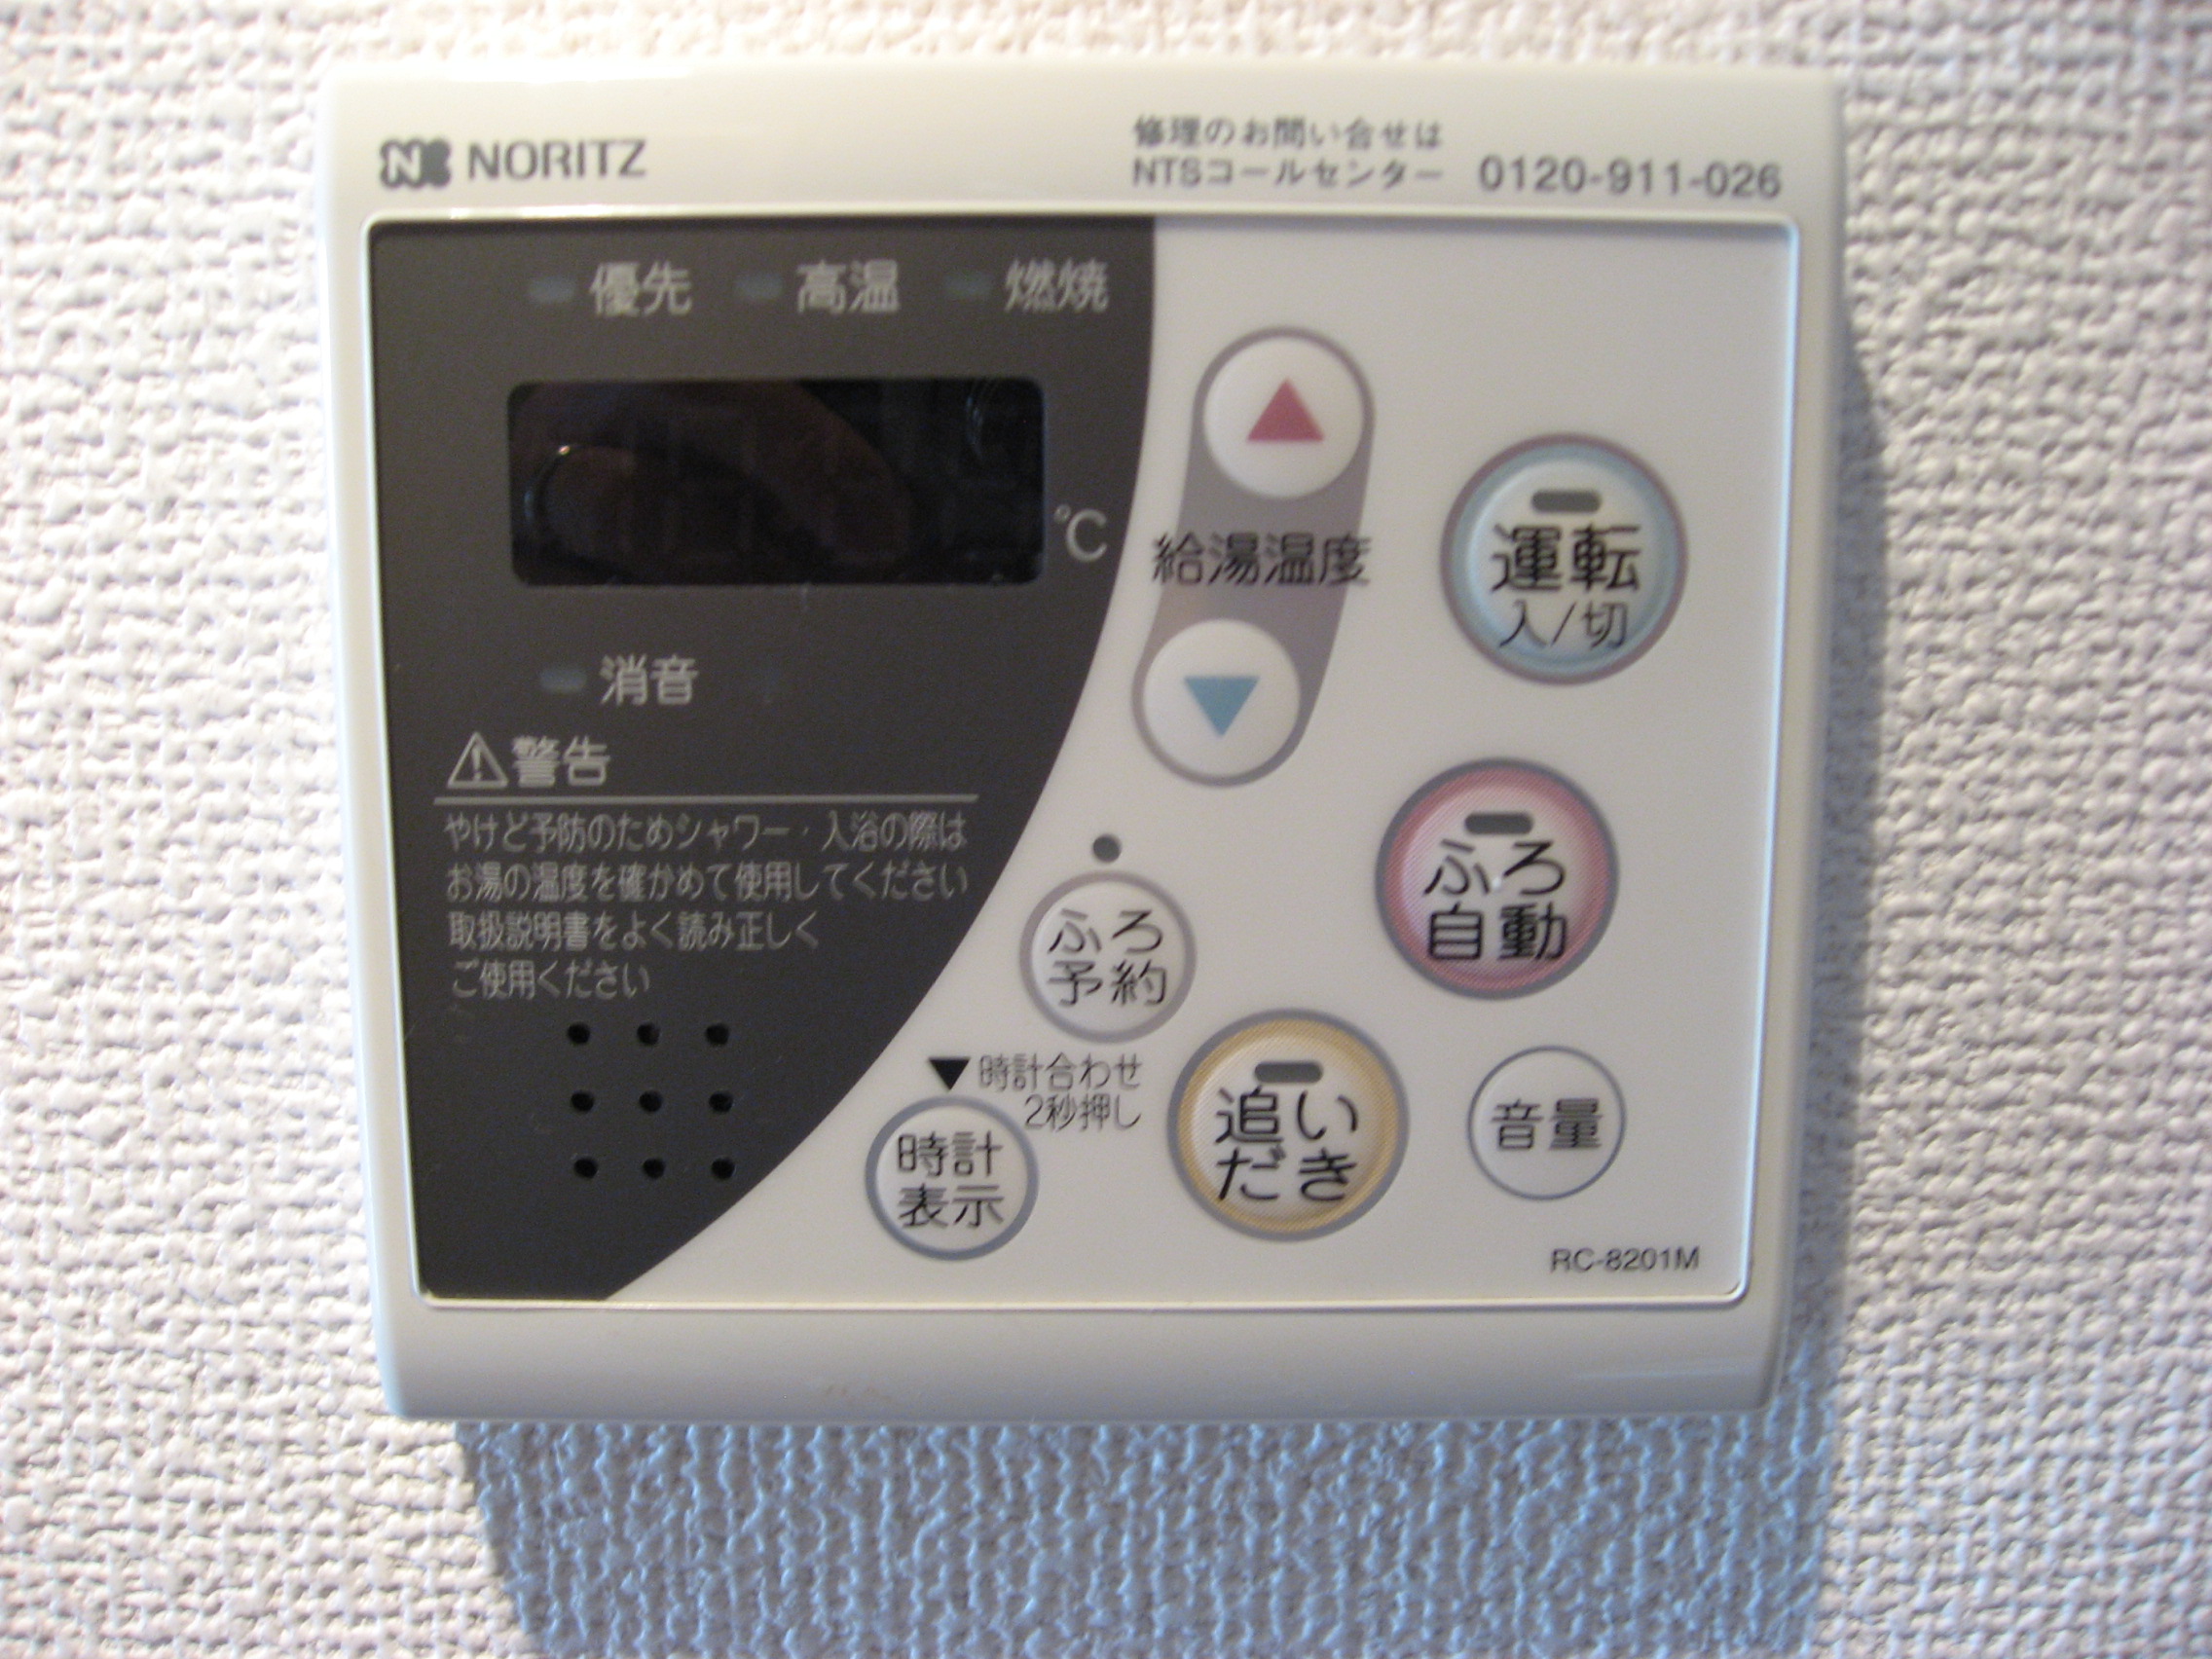 Bath. It is Tsui焚 possible water heater on the remote control! 